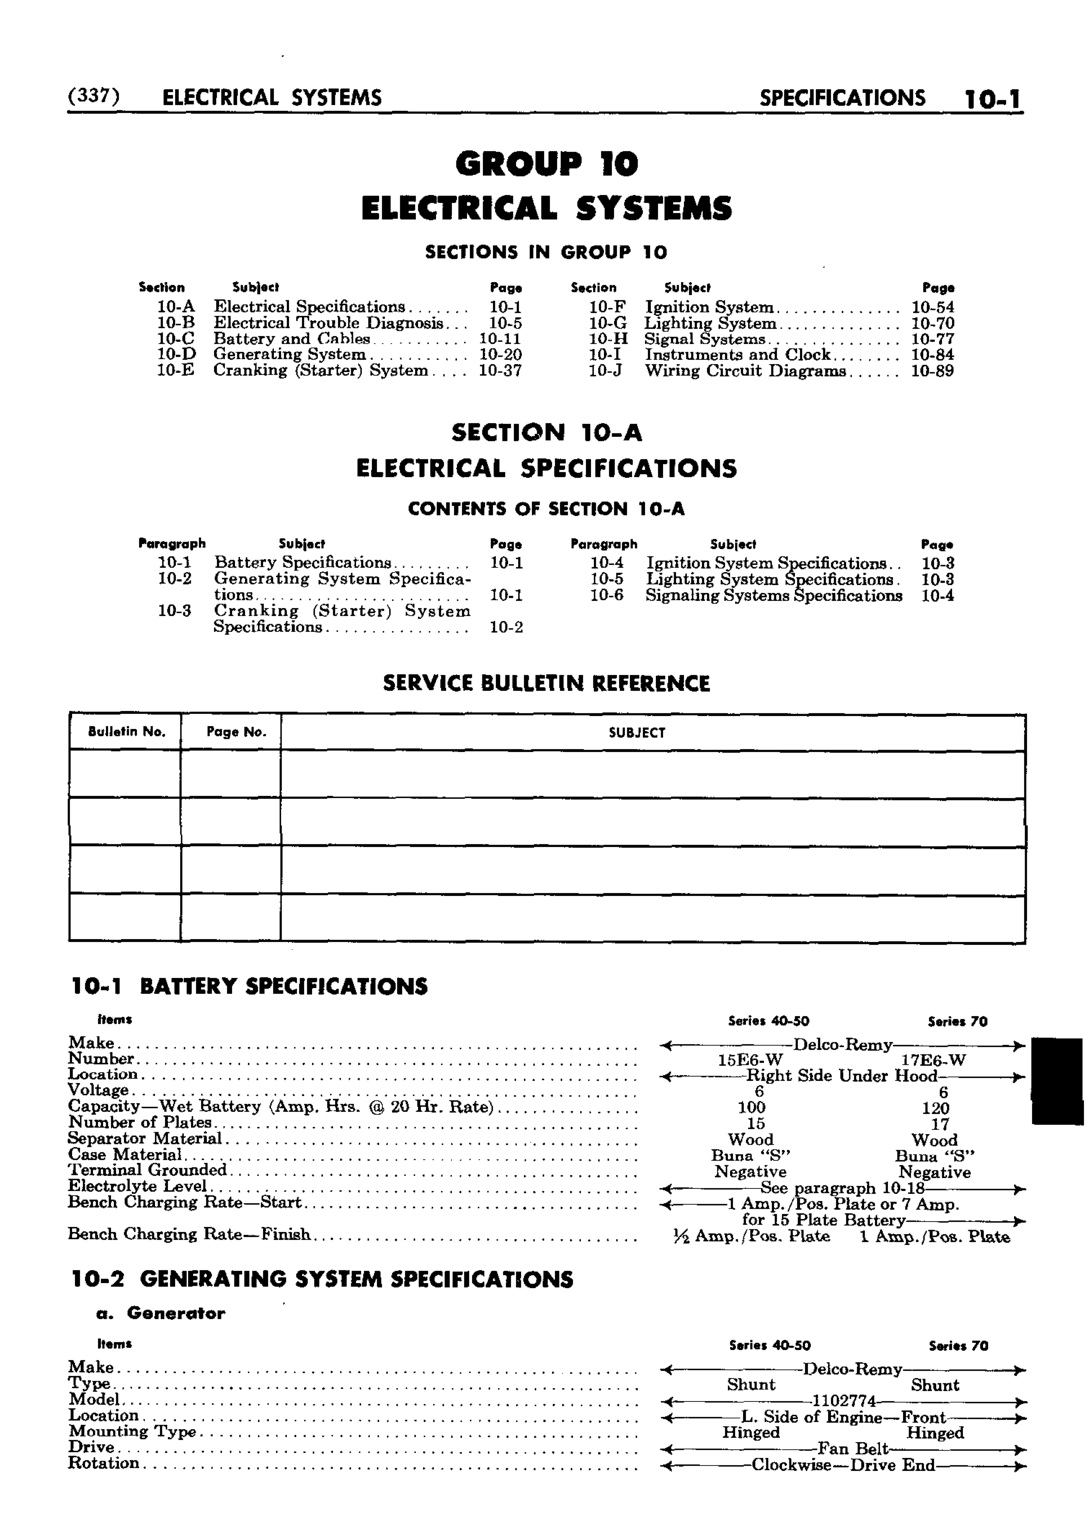 n_11 1952 Buick Shop Manual - Electrical Systems-001-001.jpg